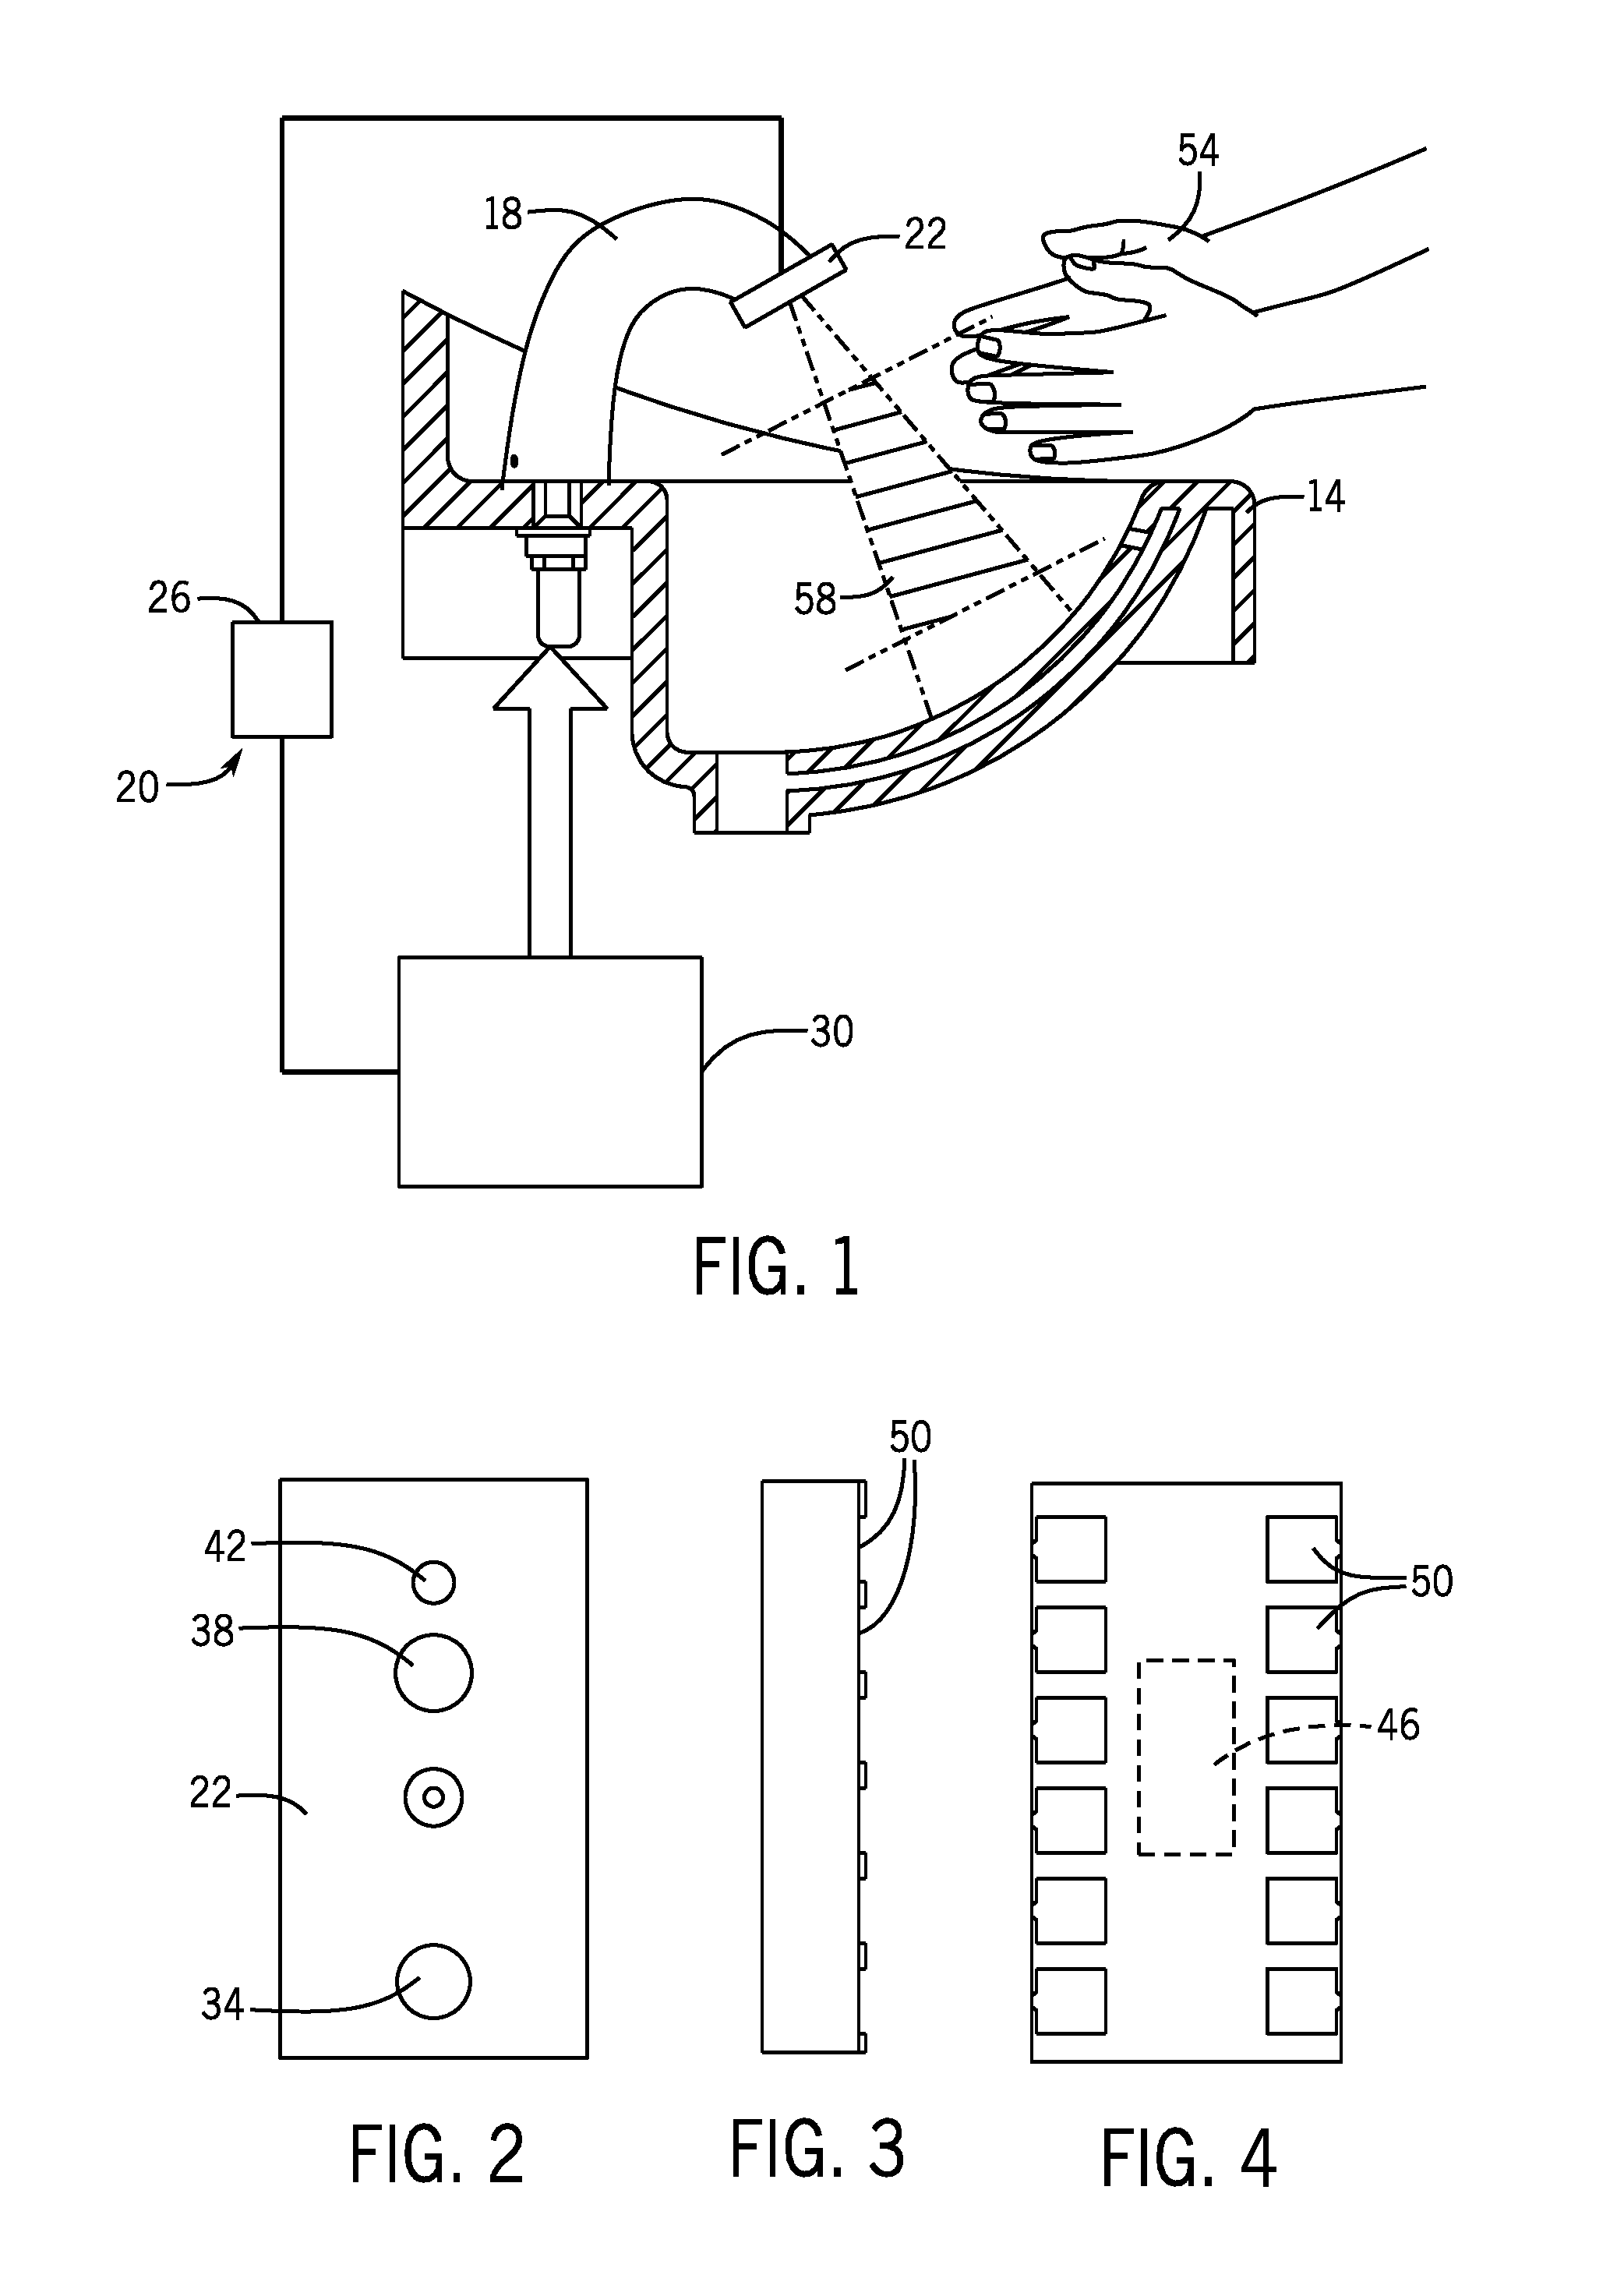 Time-of-Flight Recognition System for a Bathroom Fixture